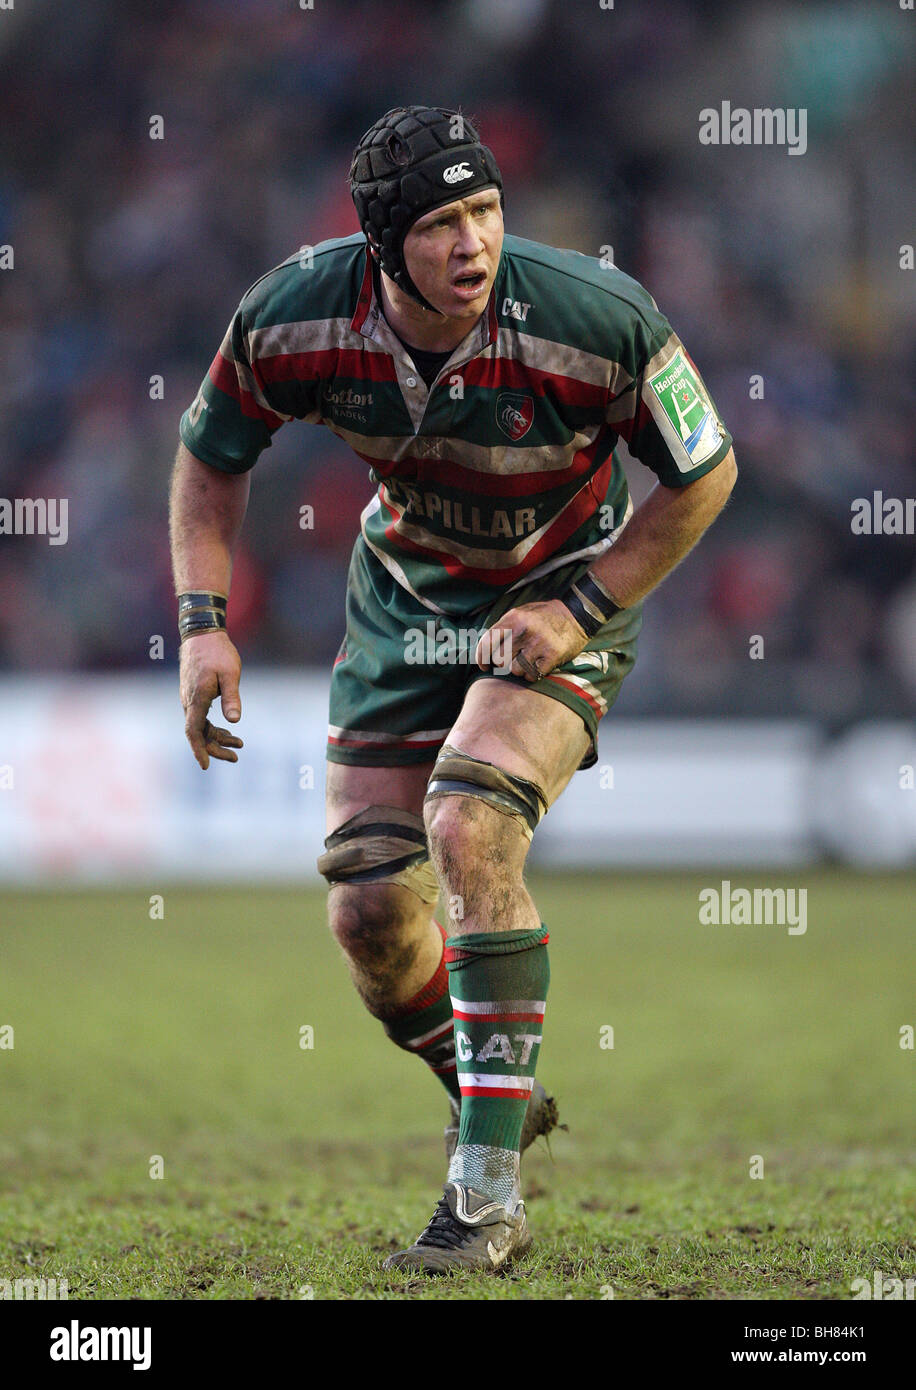 BEN WALD LEICESTER TIGERS RU WELFORD ROAD LEICESTER ENGLAND 16.01.2010 Stockfoto